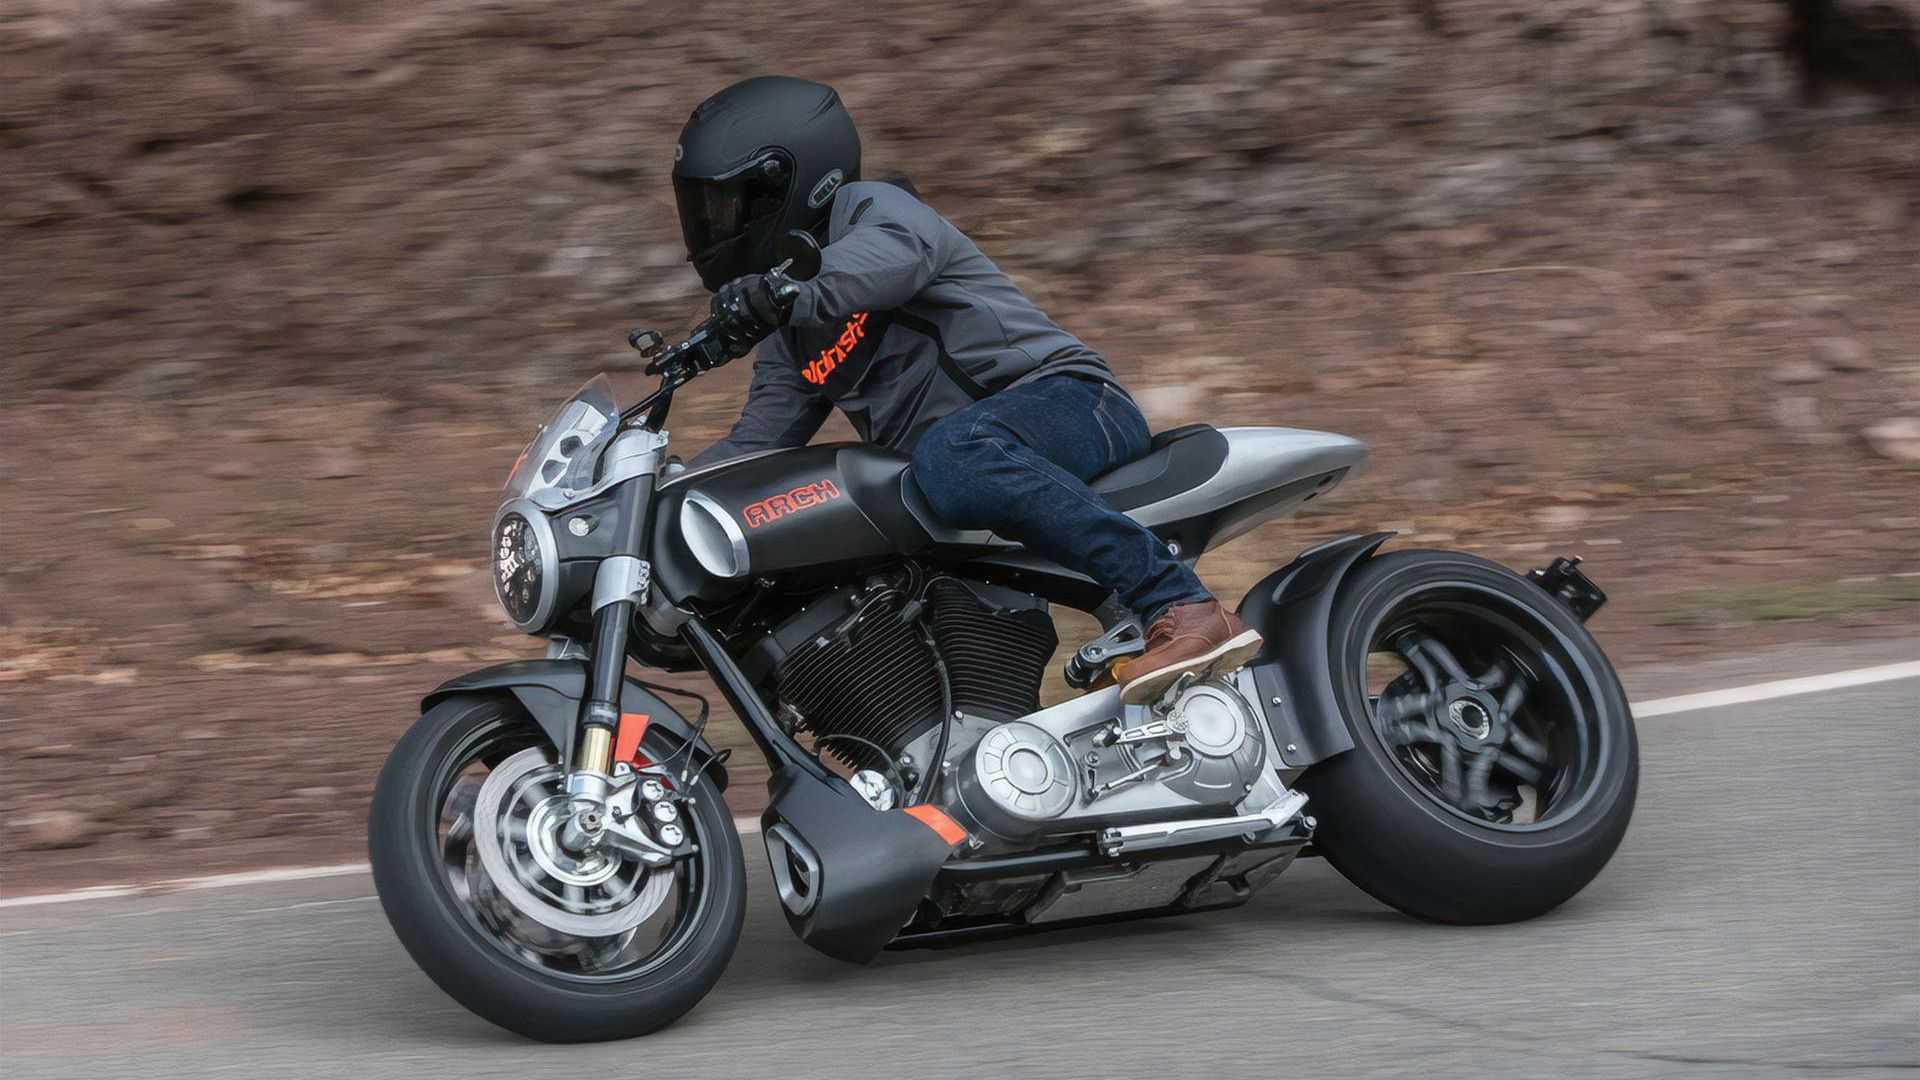 bao john wick is the founder of arch motorcycle company which is considering the possibility of adding an electric vehicle line to its product portfolio 651d5dd9cbb9f John Wick Is The Founder Of Arch Motorcycle Company, Which Is Considering The Possibility Of Adding An Electric Vehicle Line To Its Product Portfolio